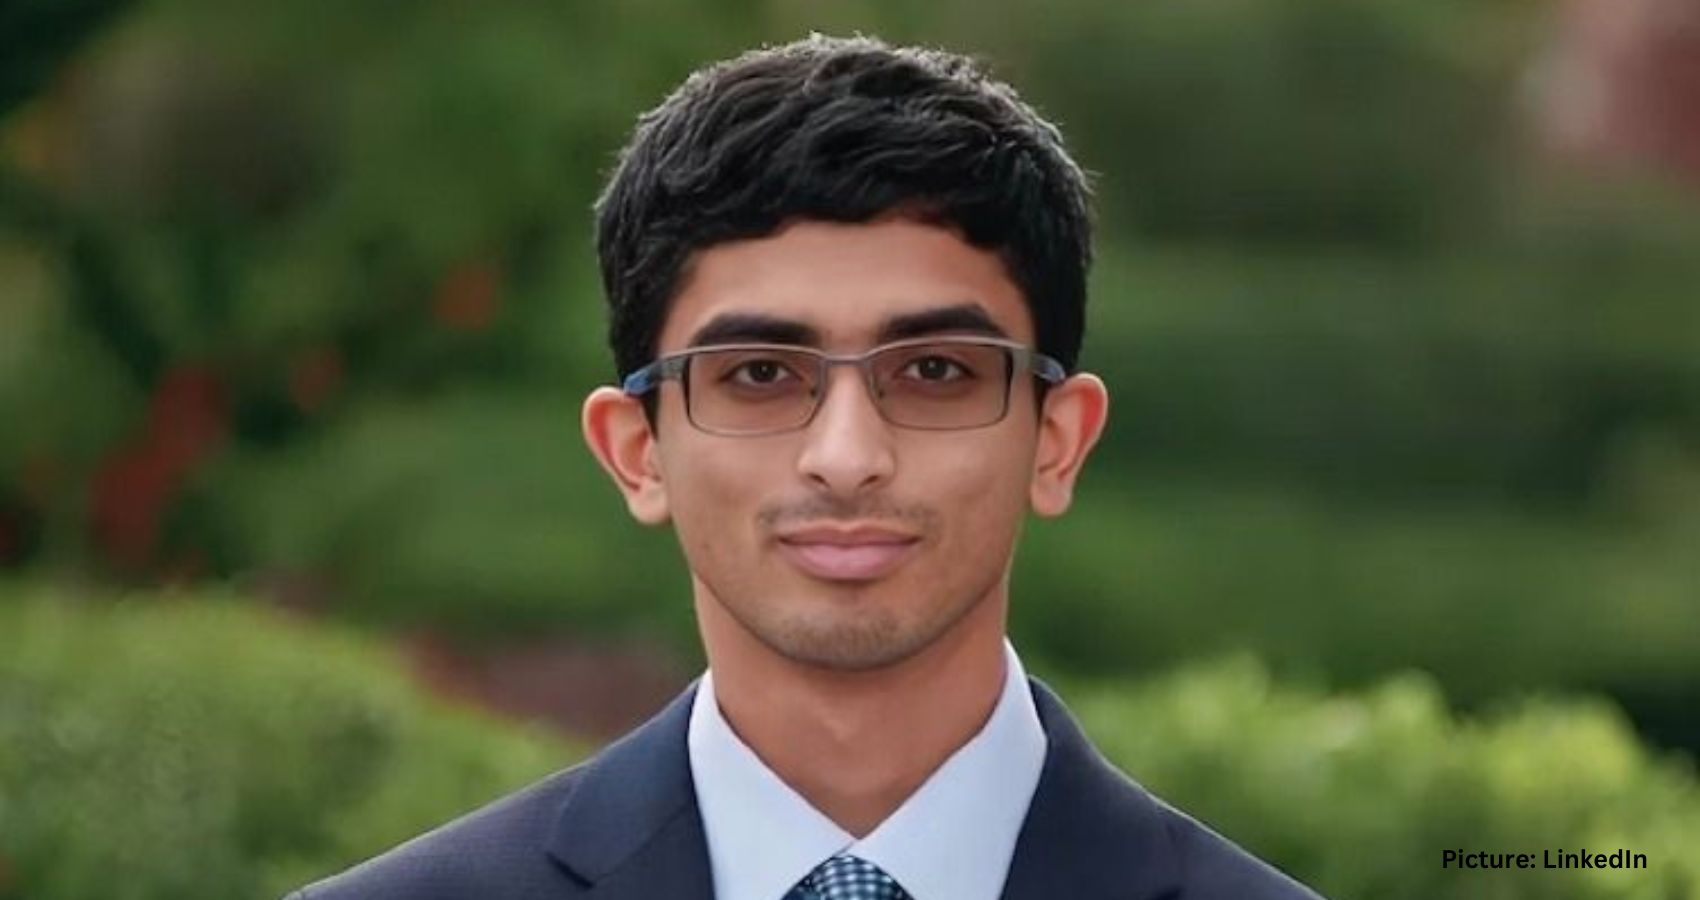 Featured & Cover Ashwin Ramaswami Gen Z Indian American Wins Democratic Primary in Georgia Eyes Historic State Senate Seat